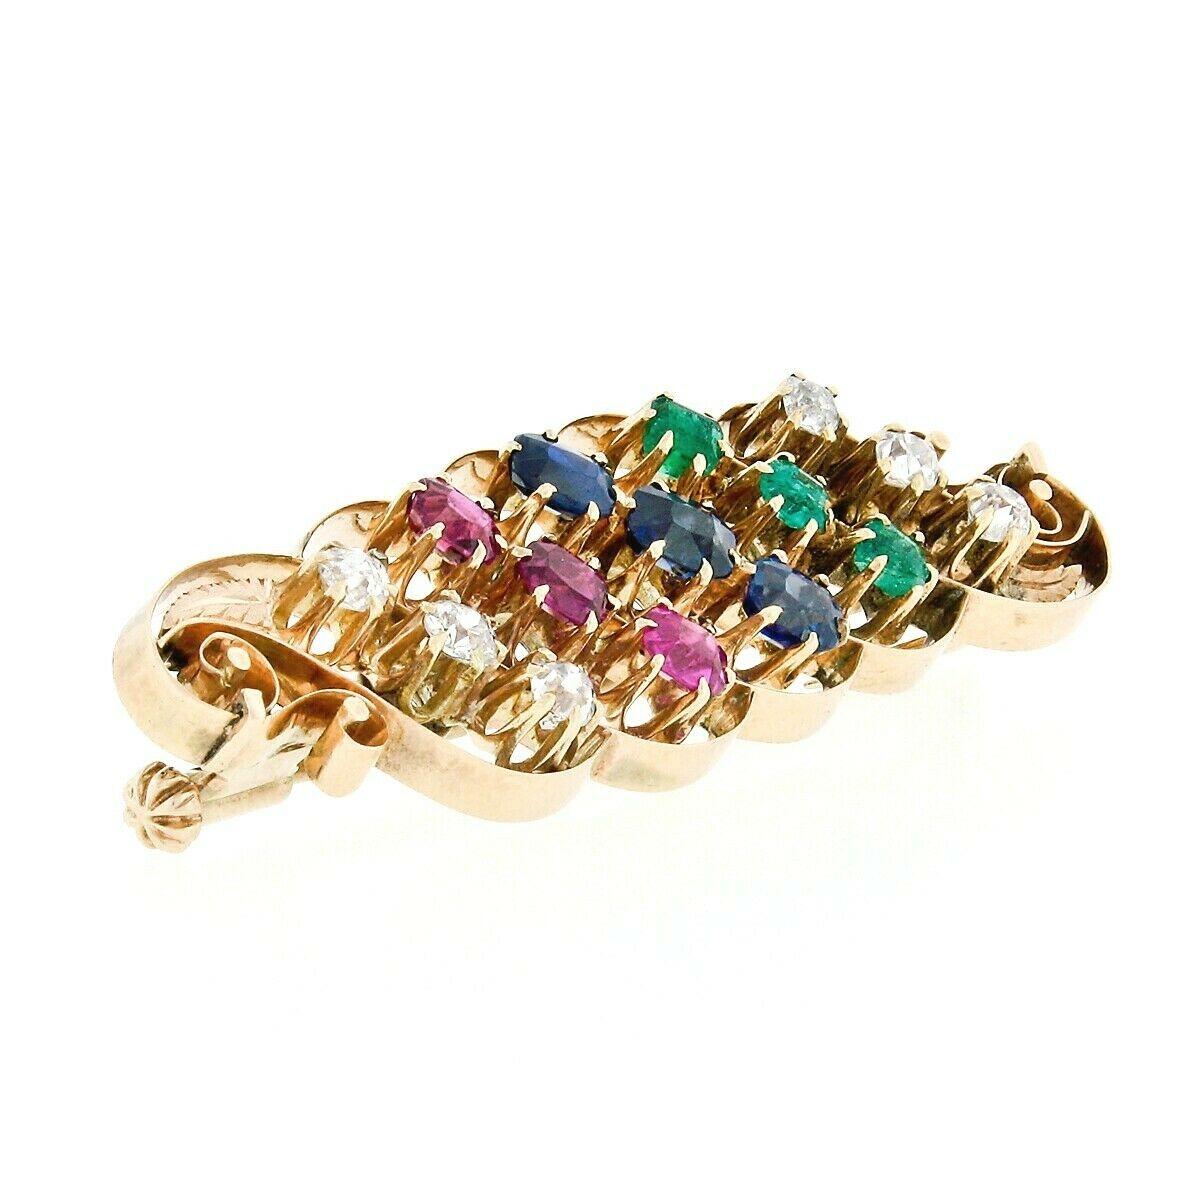 Antique Arts & Crafts 14k Gold GIA Sapphire Ruby & Emerald Swirl Leaf Brooch Pin For Sale 3